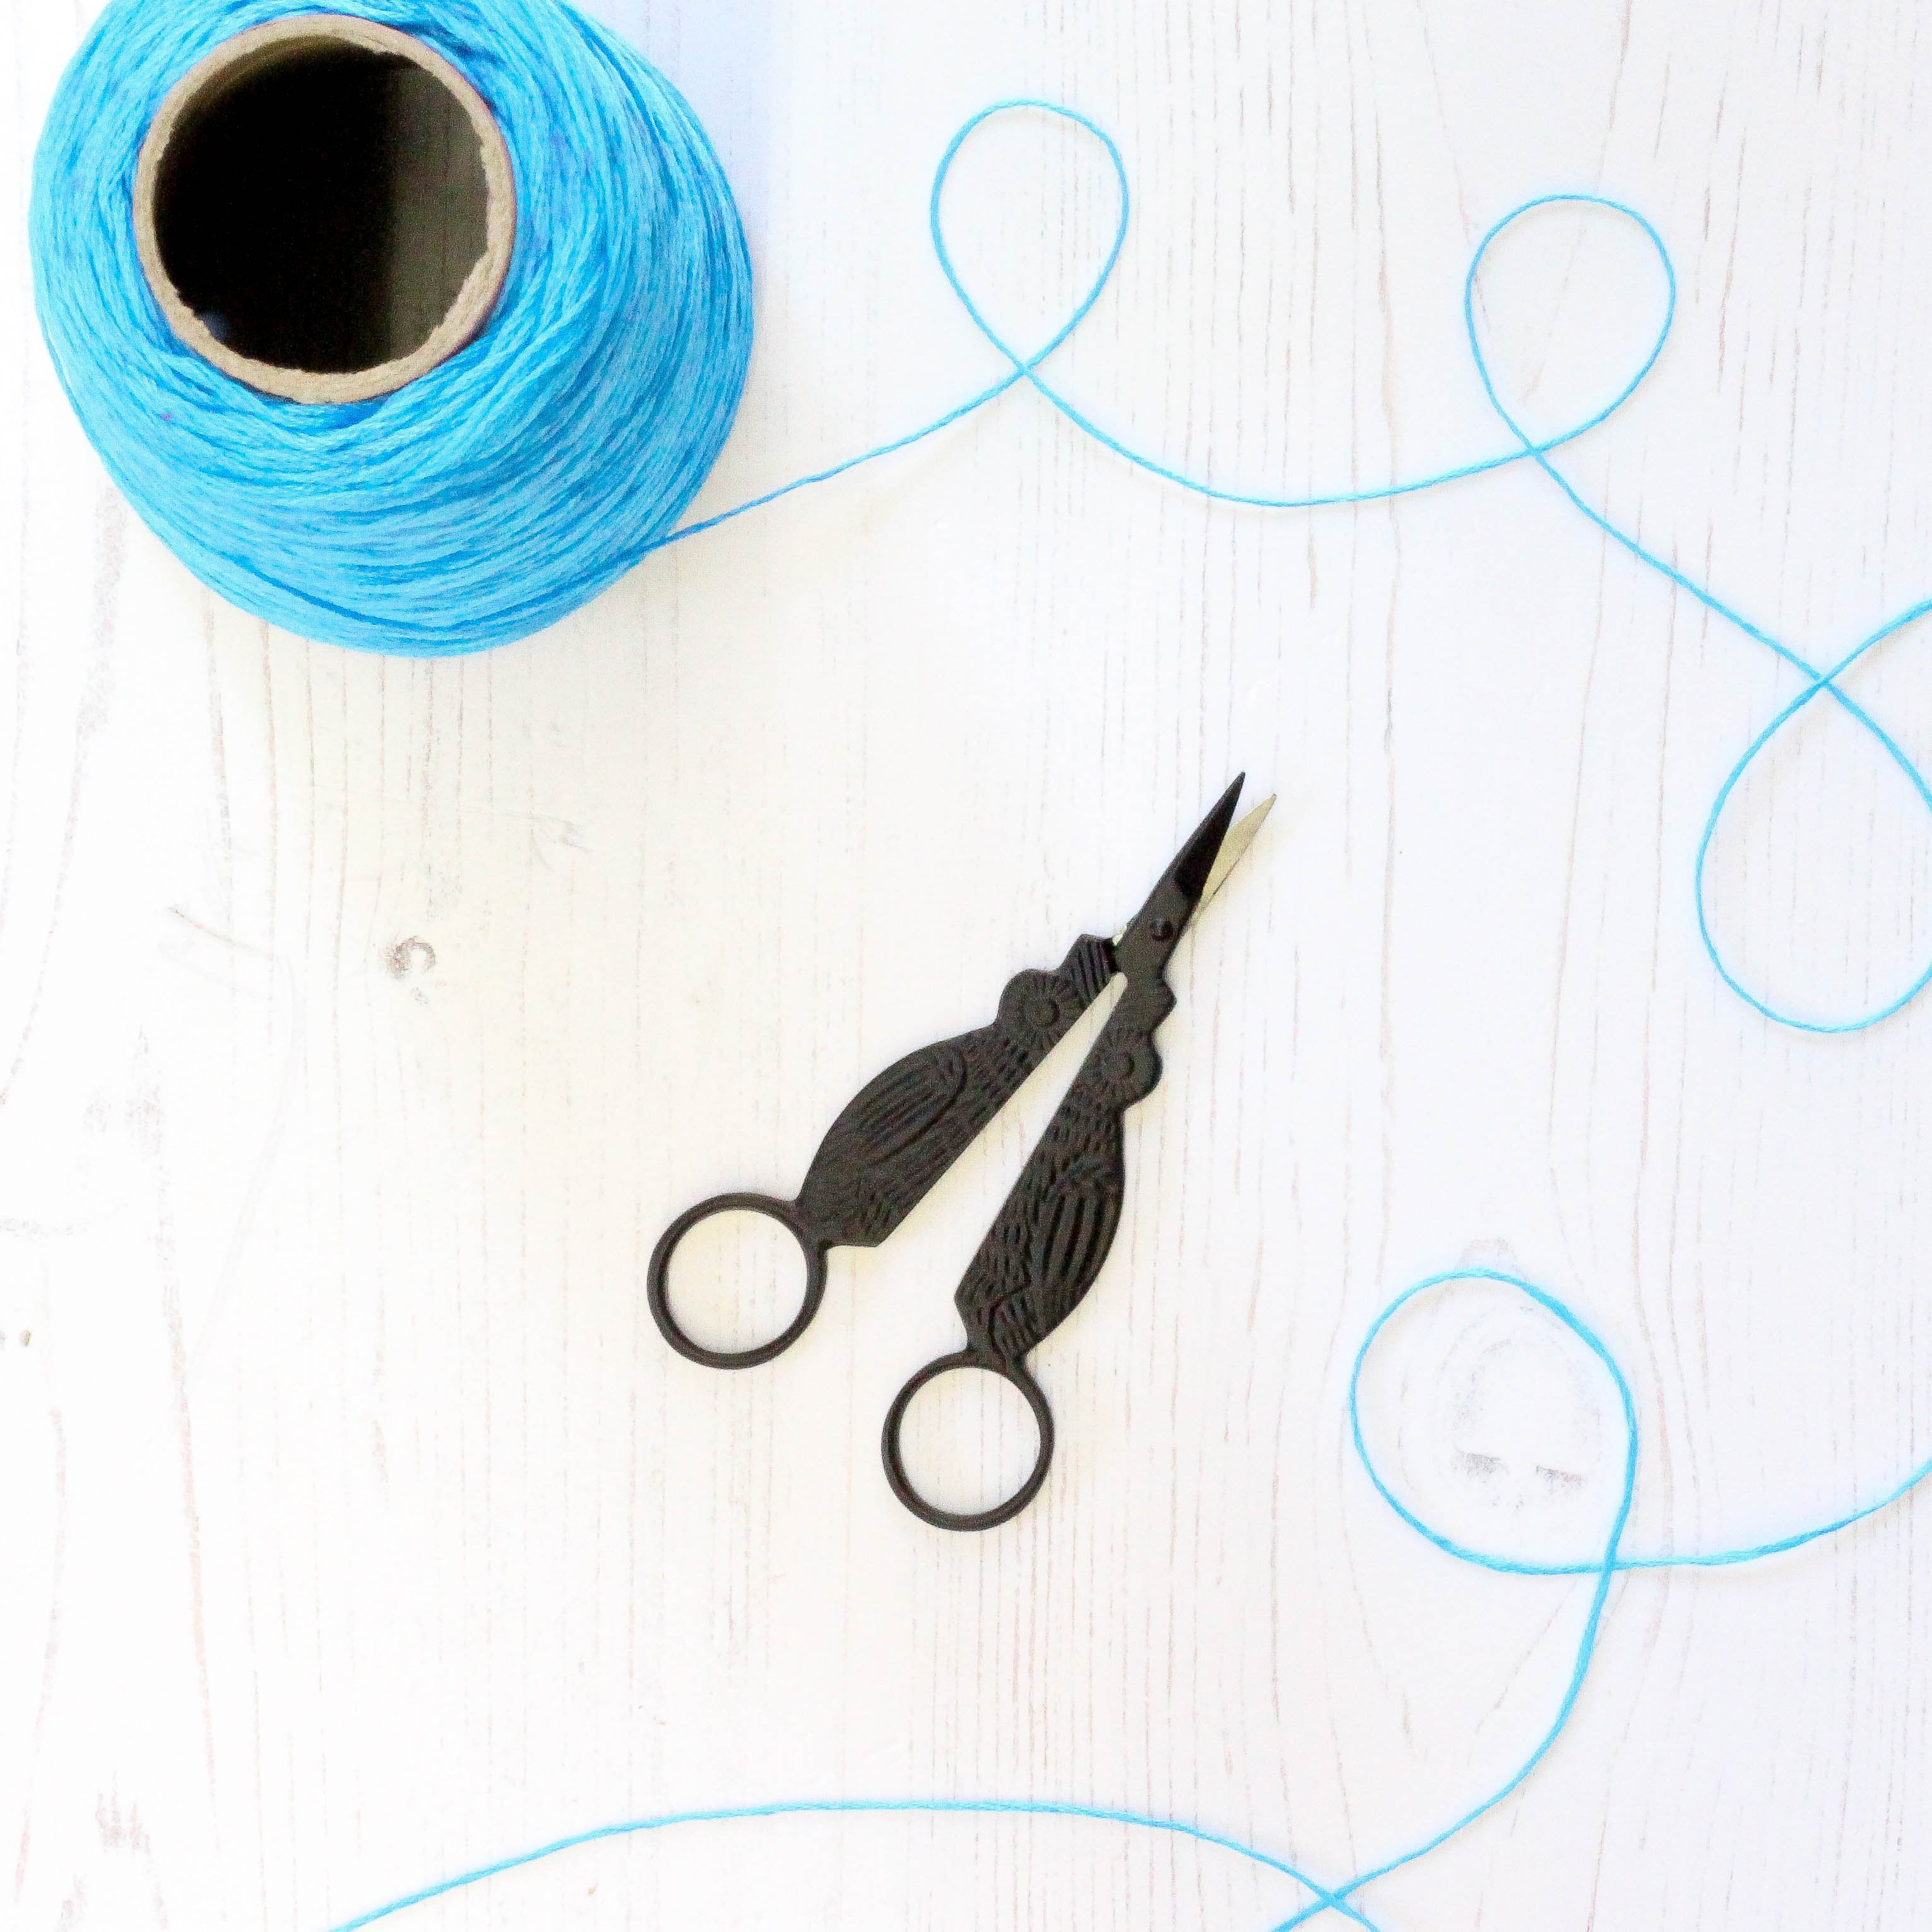 Black Owl Embroidery Scissors open with thread